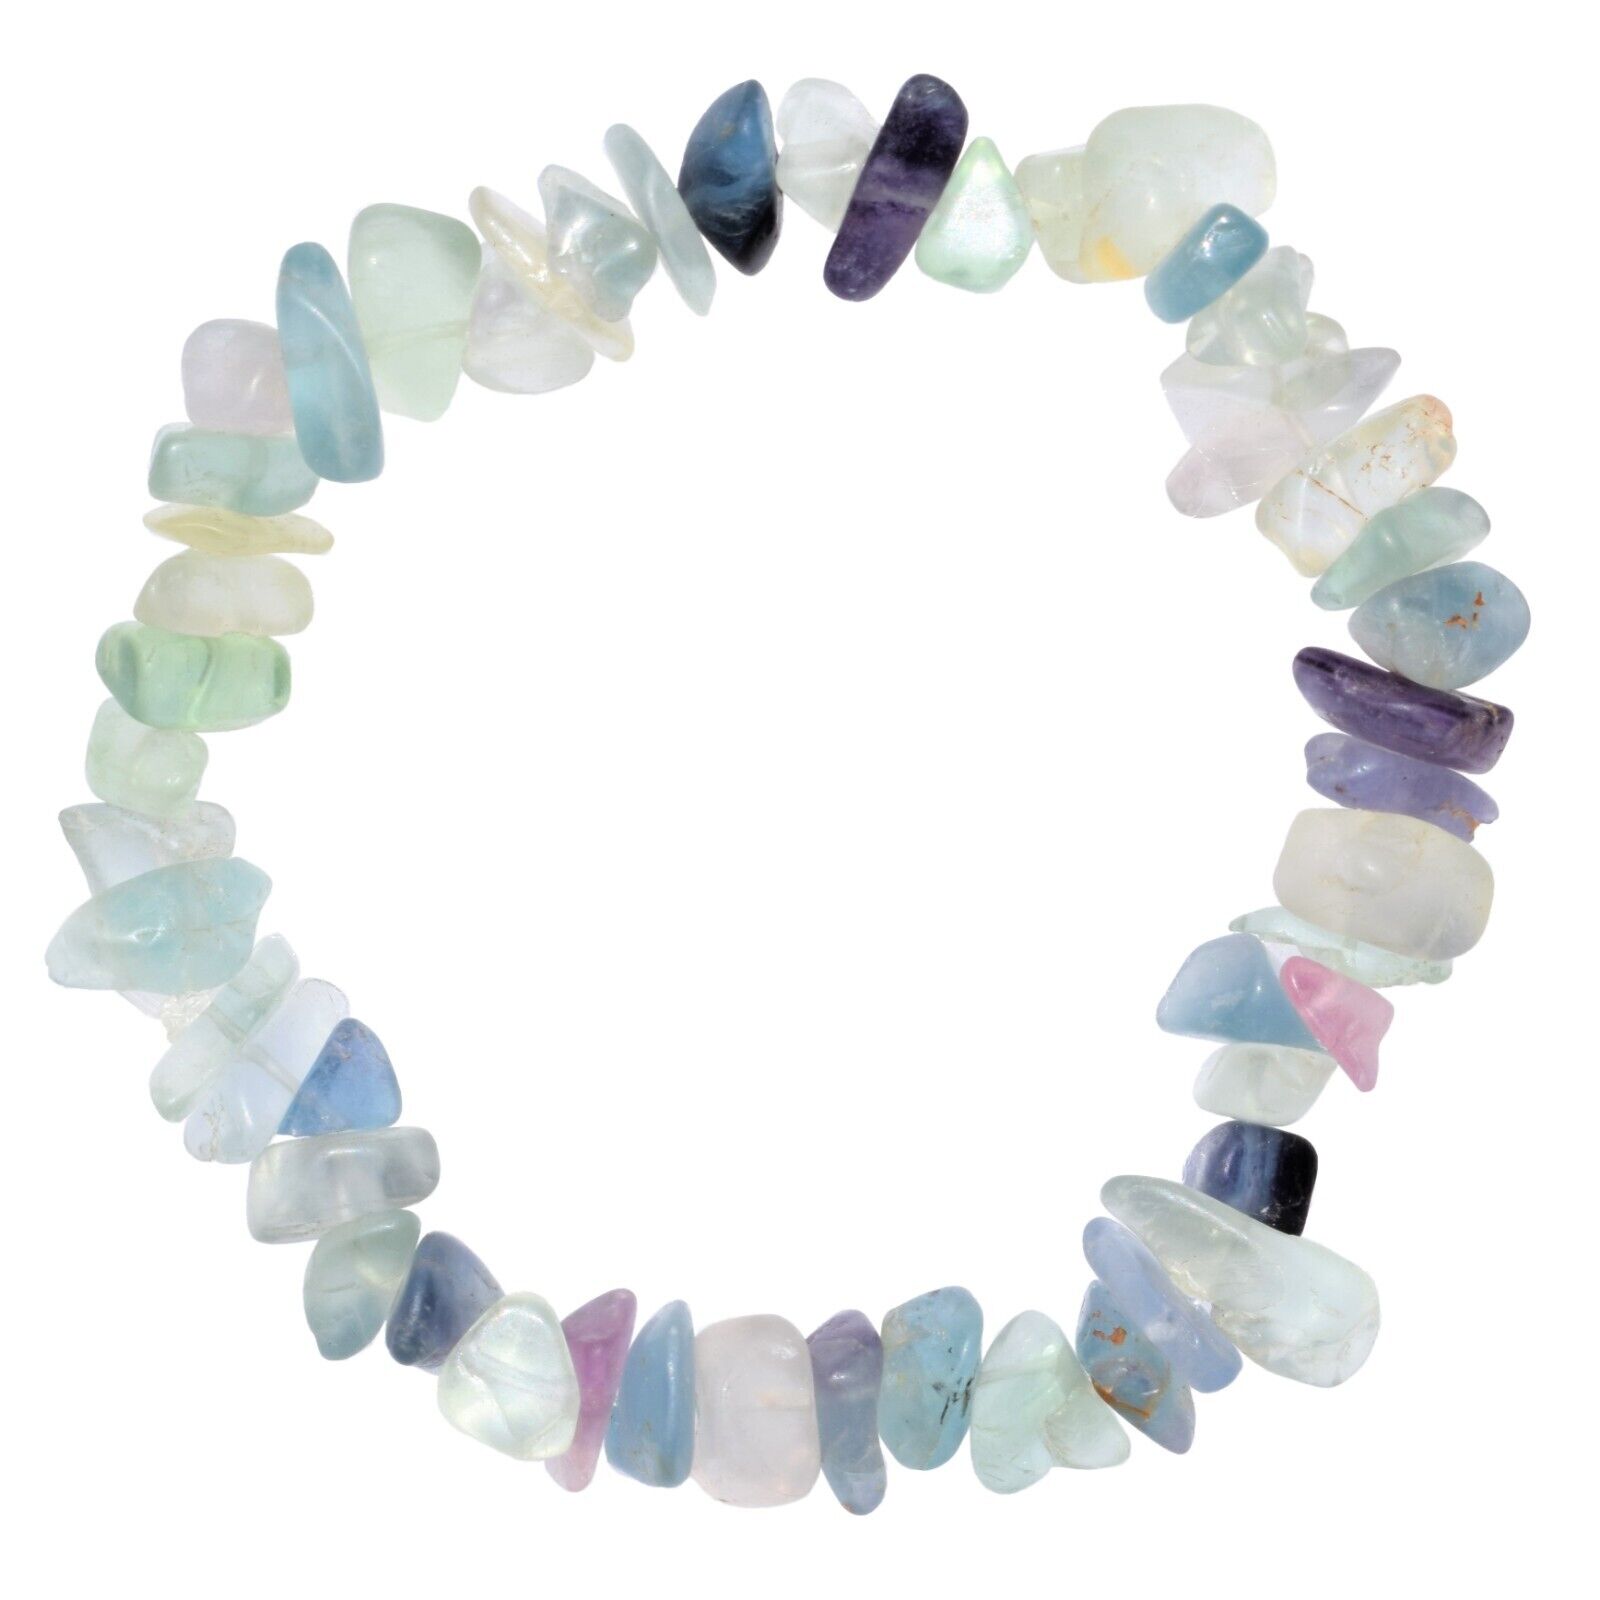 Premium CHARGED Rainbow Fluorite Crystal Stretchy Bracelet + Selenite Charger